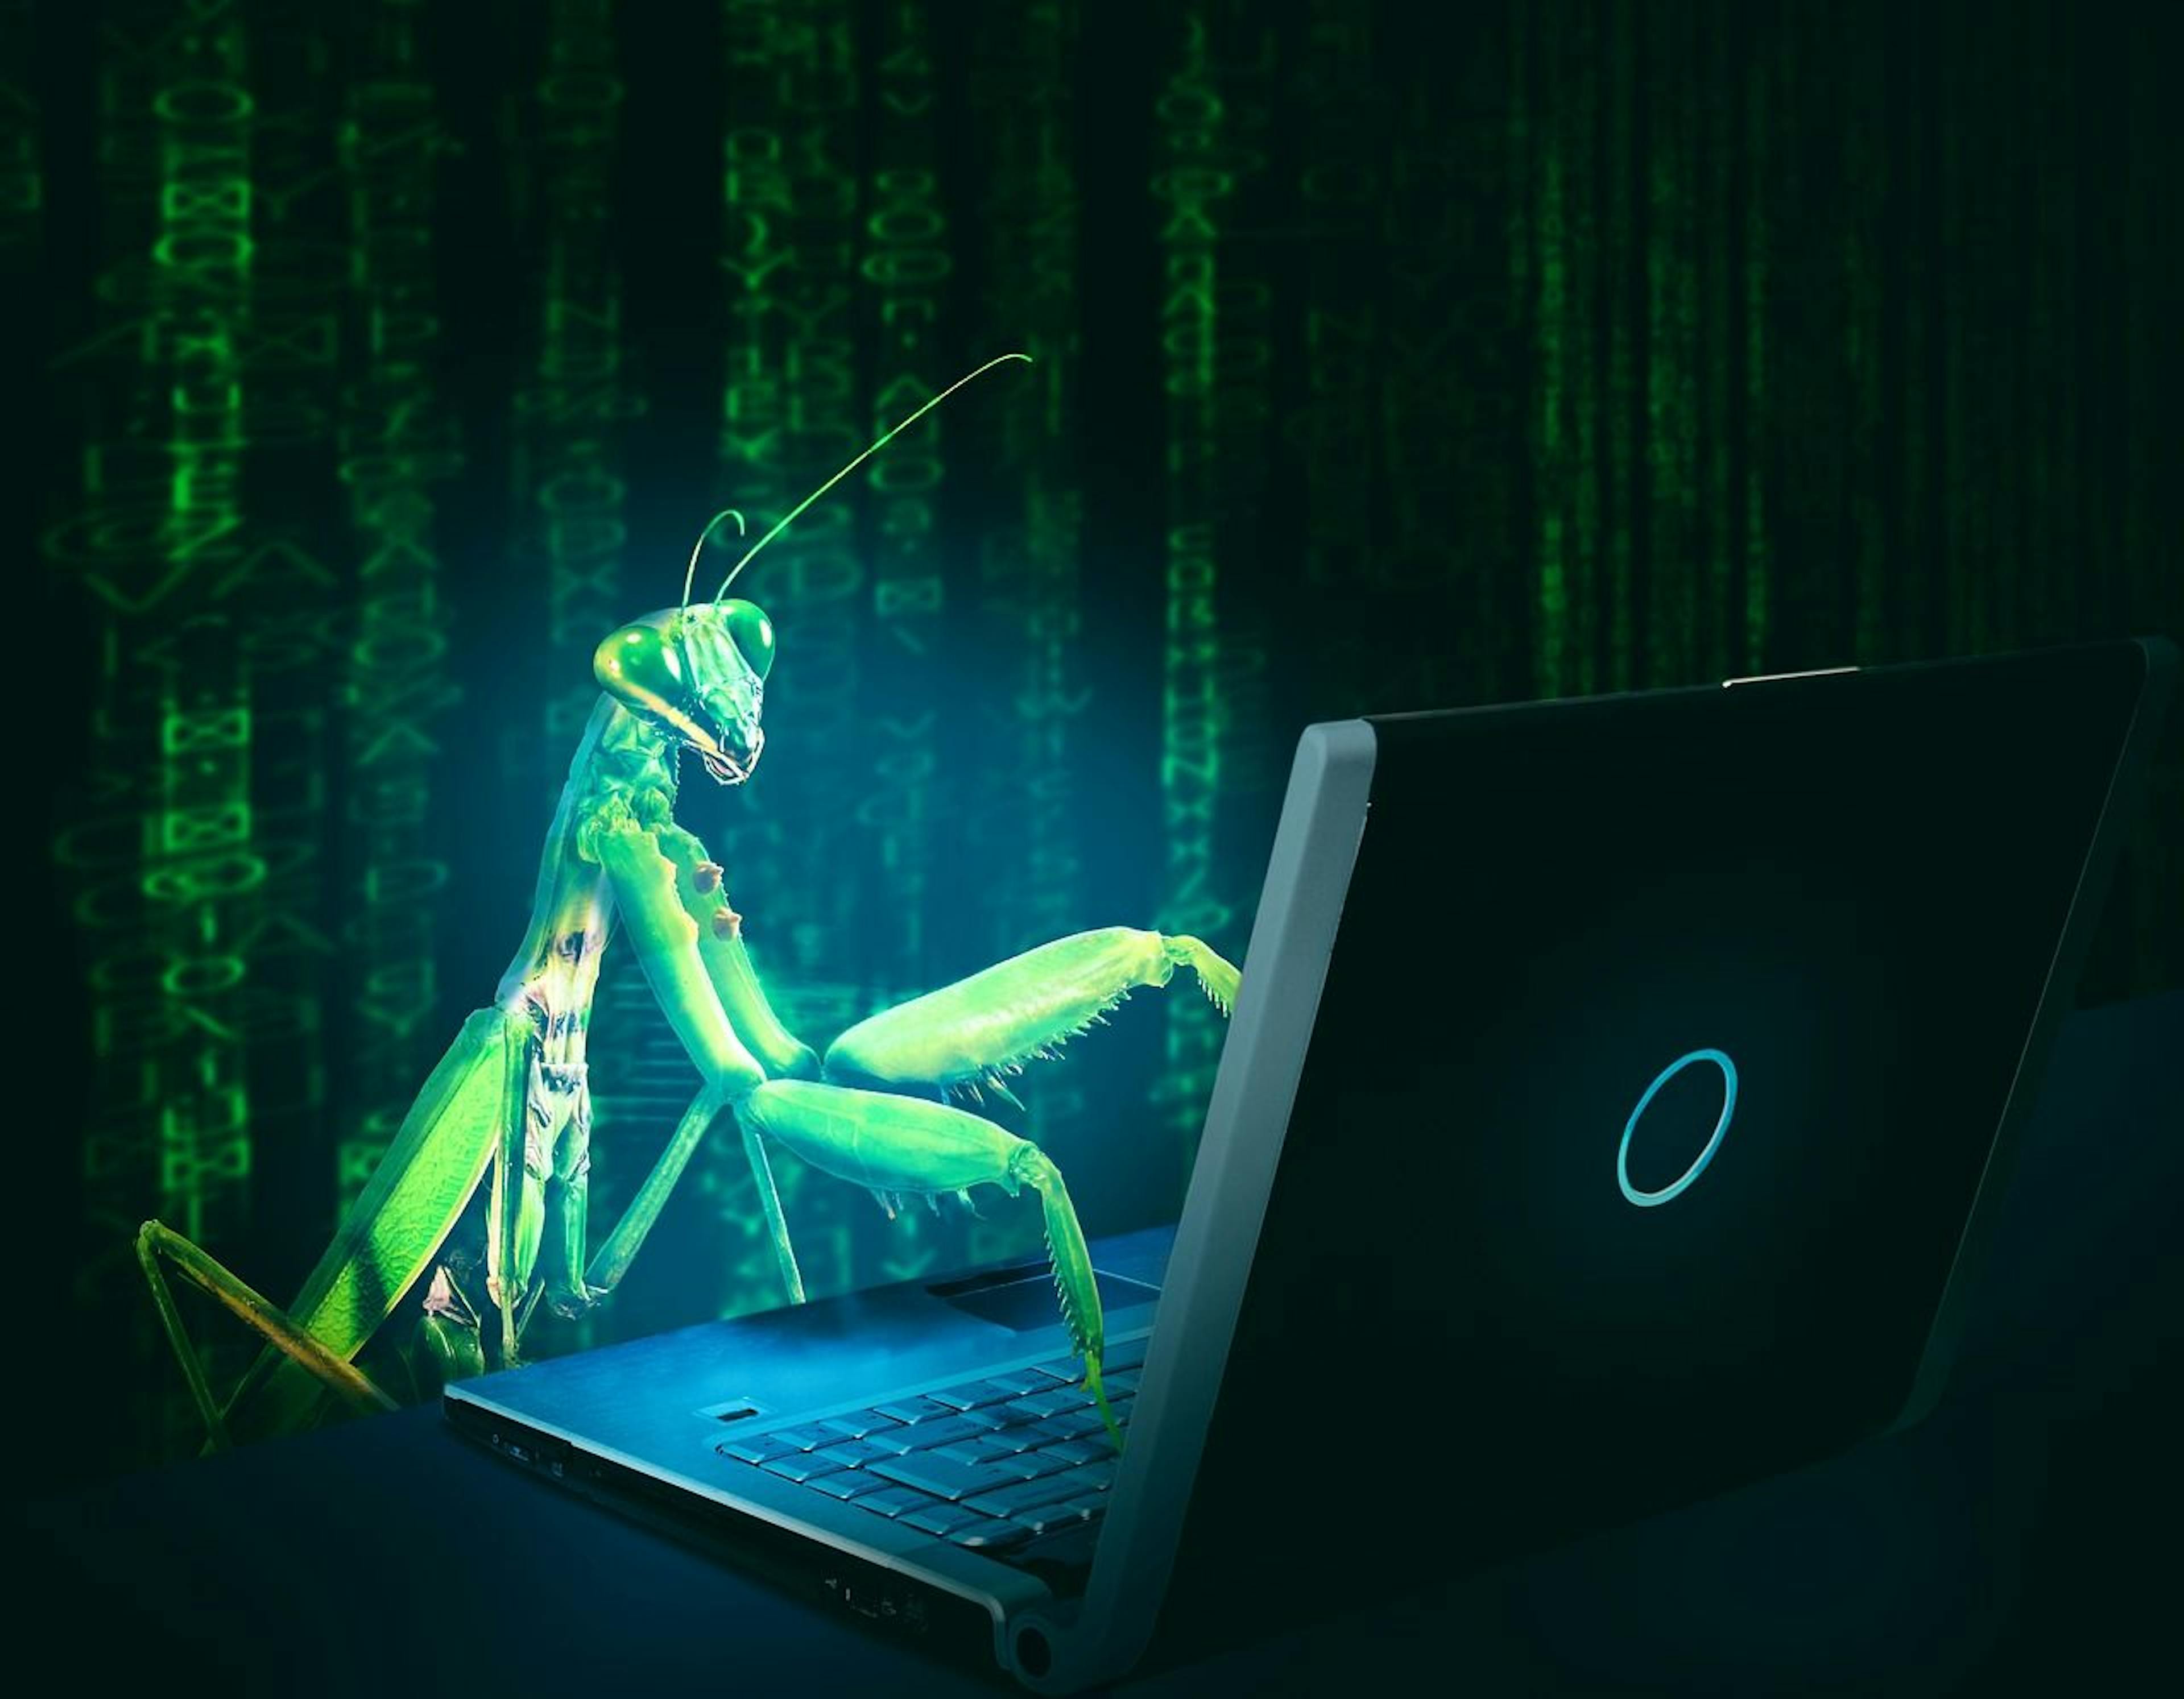 featured image - Fileless Malware: The Secret Weapon of Cybercriminals That Targets Your System’s Vulnerabilities